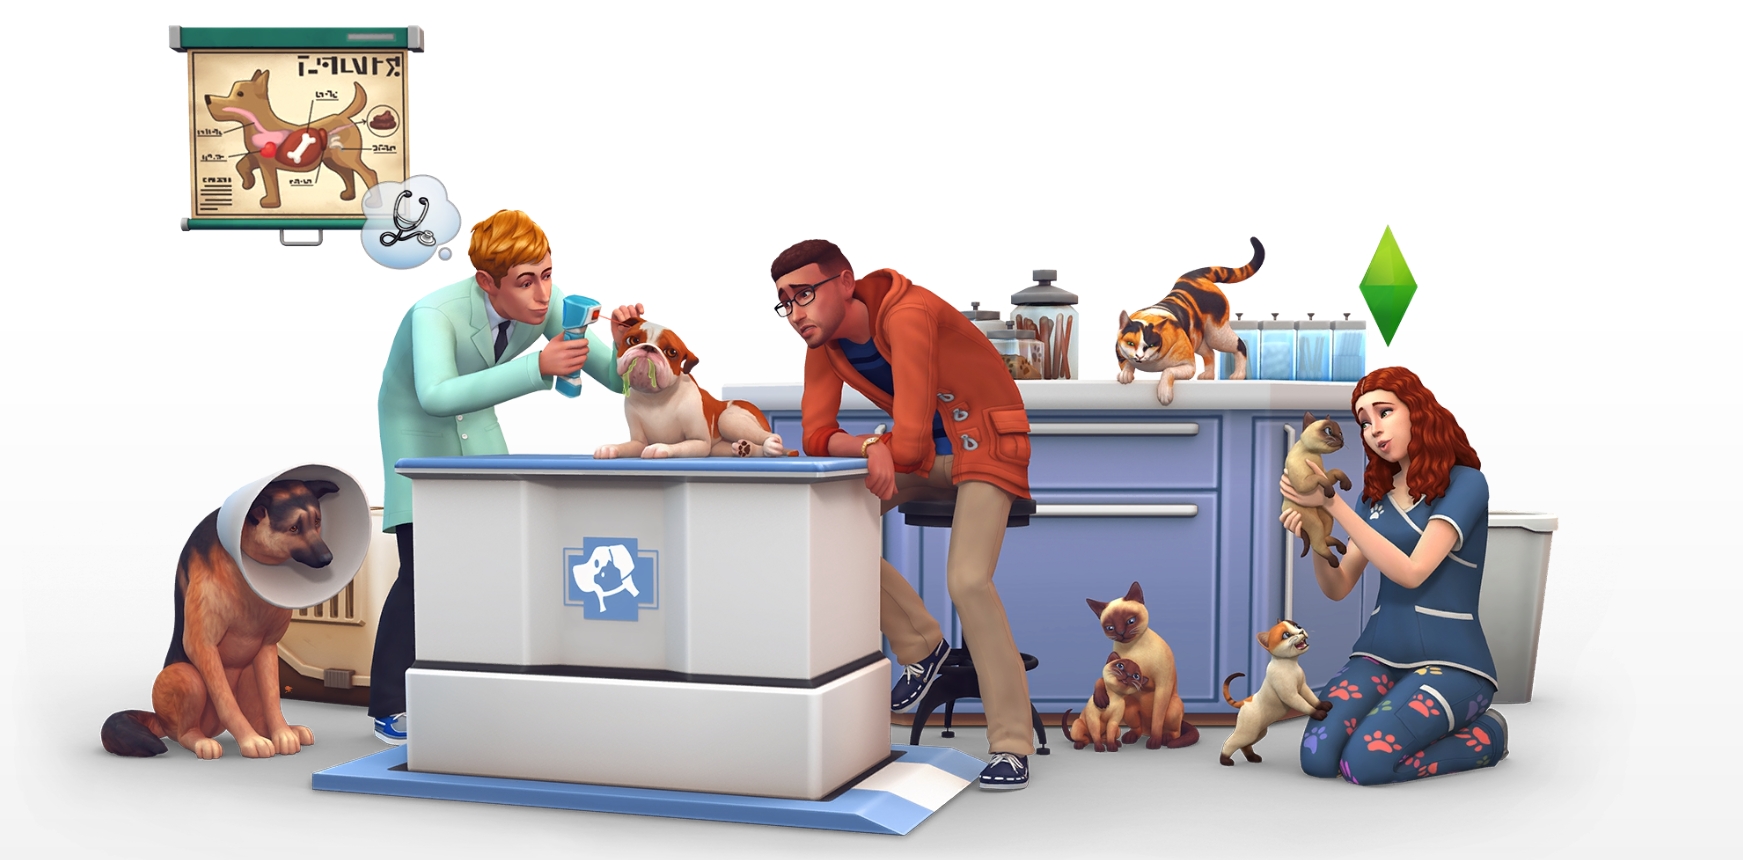 how do you send out an alert via in the sims 4 cats and dogs expansion pack